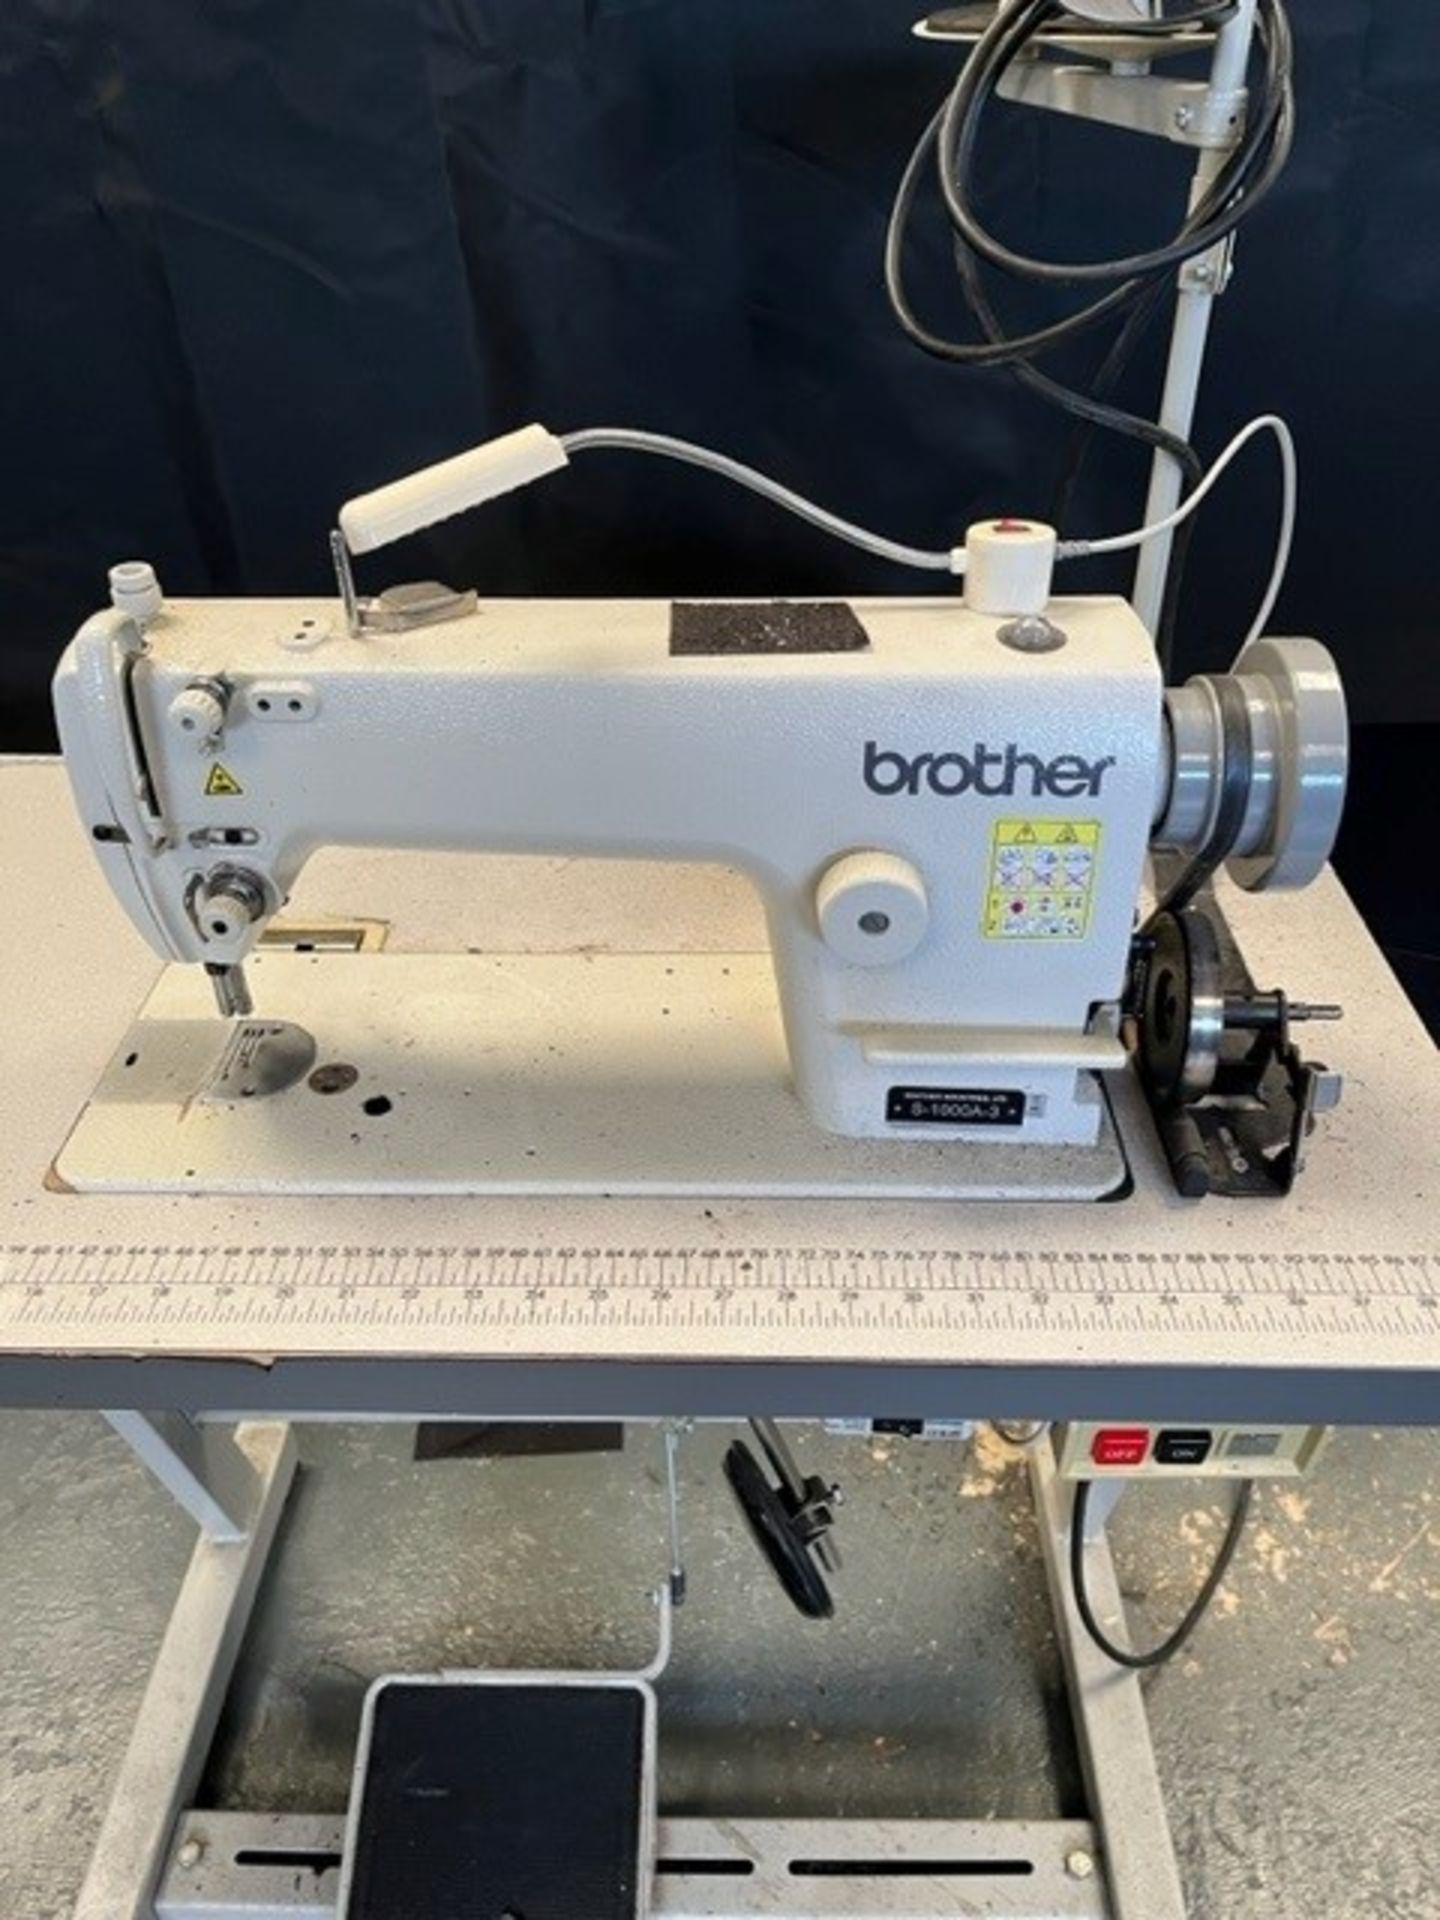 Brother S-1000A-3 Industrial Lockstitch Sewing Machine with Sewing Table - Image 3 of 7